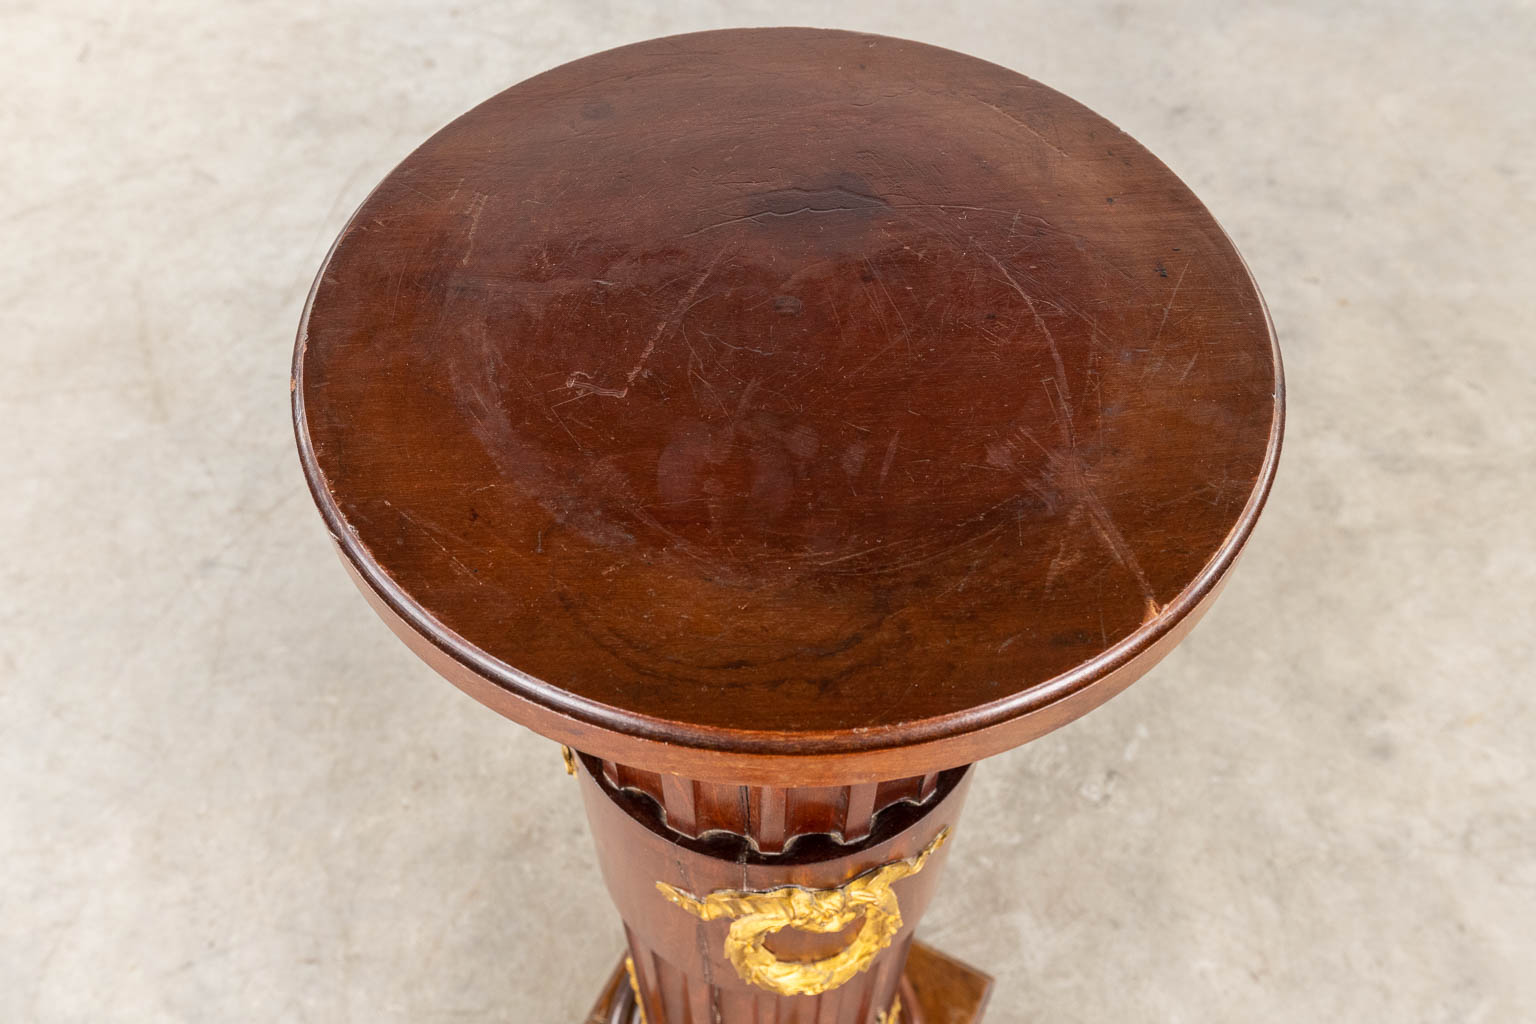 A pedestal, mahogany mounted with bronze in Louis XVI style. Circa 1900. (D:31 x W:31 x H:103 cm)